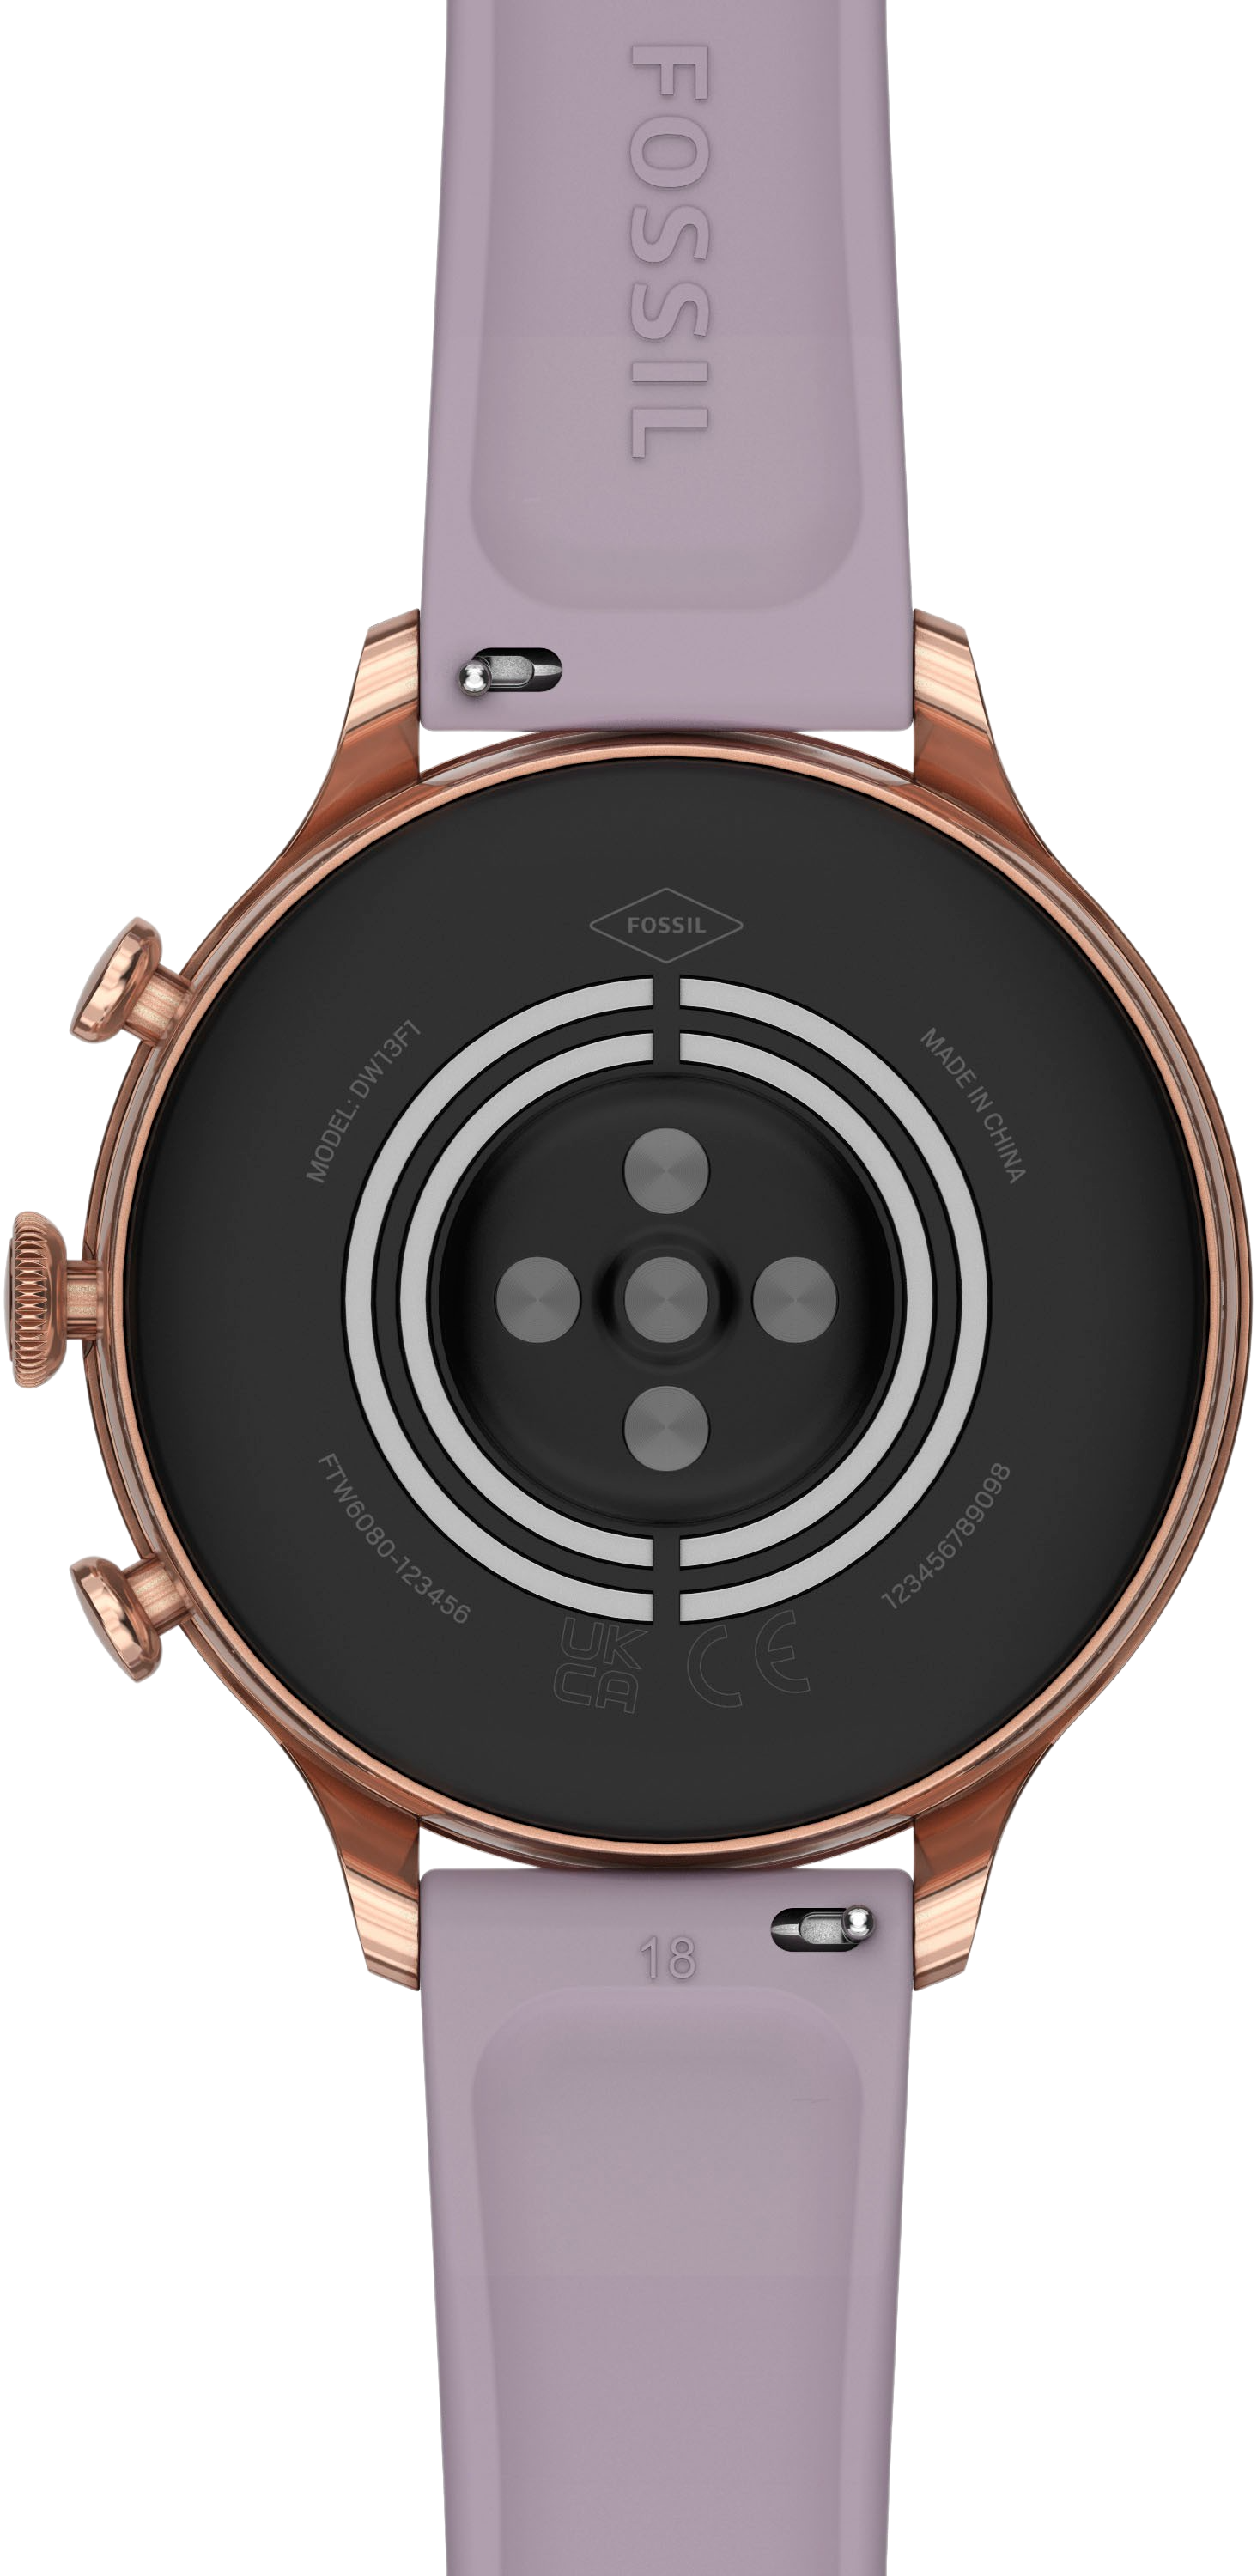 Purple/Rose Gold Fossil Gen 6, Stainless Steel Case & Silicone Band, 42mm.3